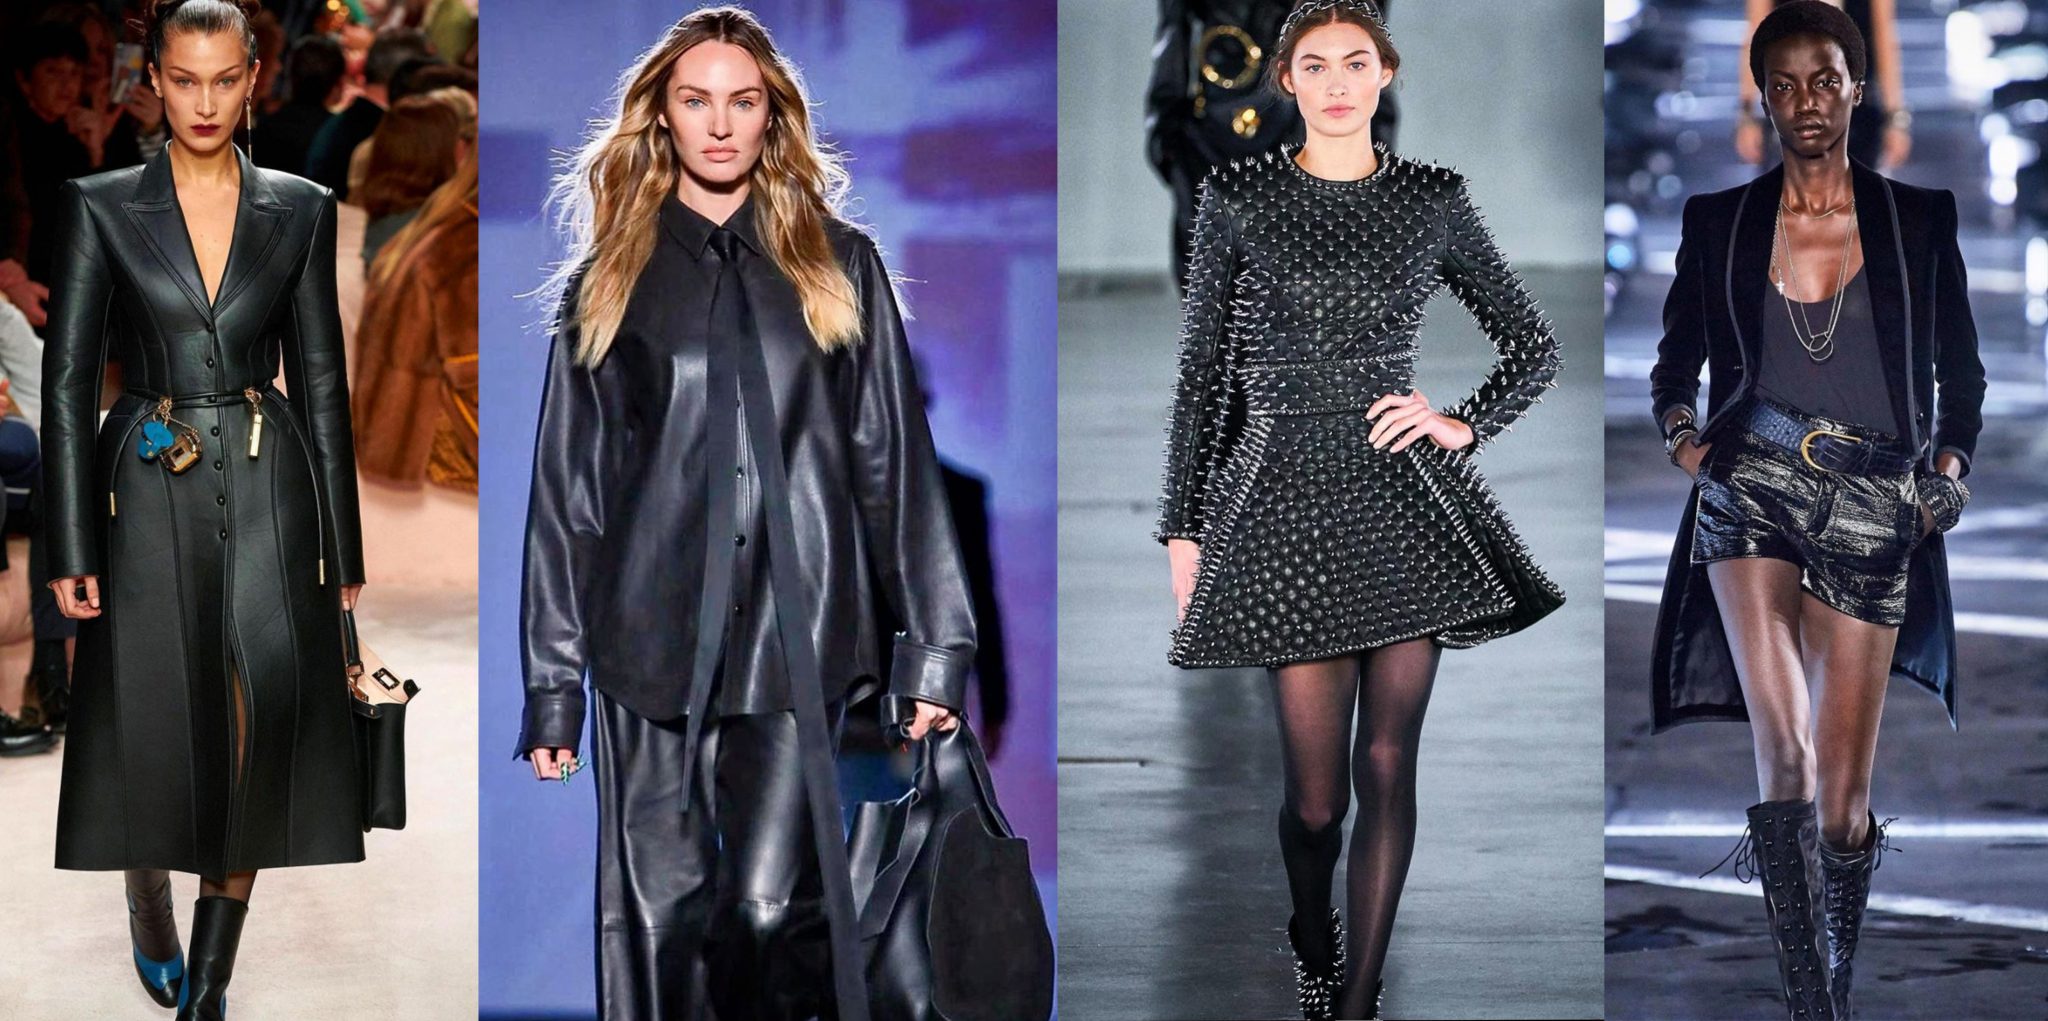 4Runway images of models in leather images by Dwight Samuels